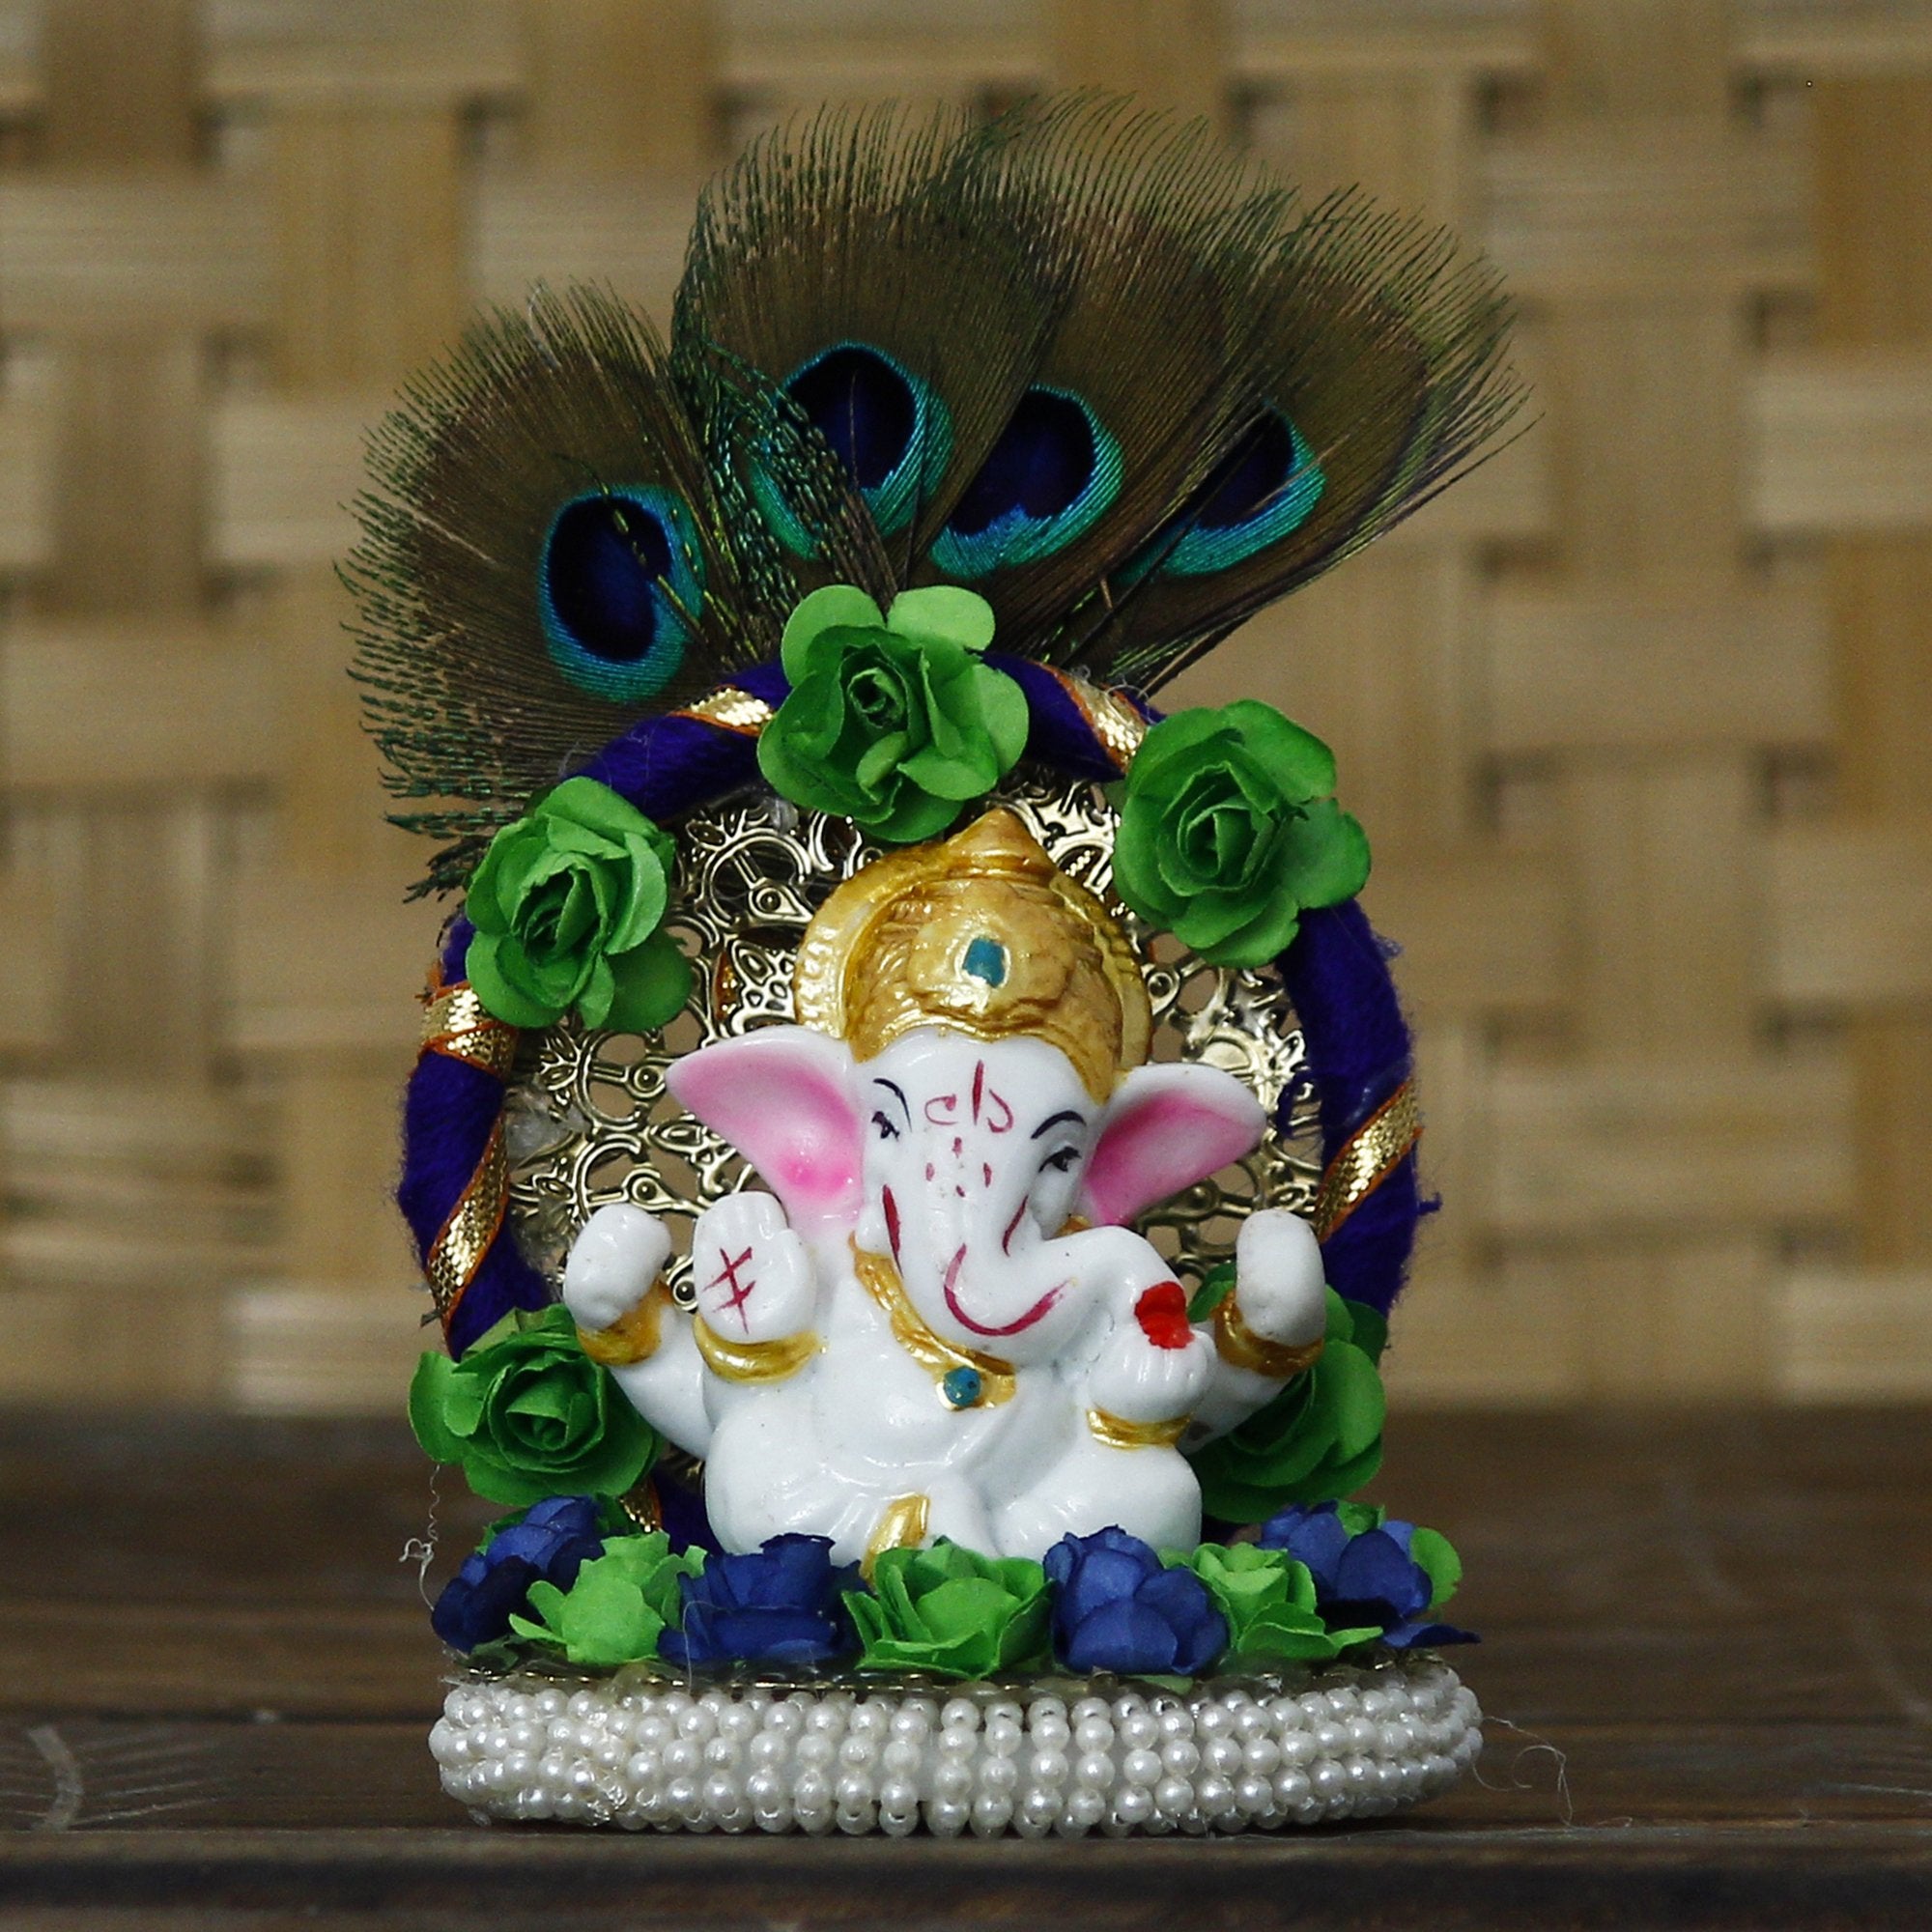 Polyresin Lord Ganesha Idol on Handcrafted Peacock Feather Floral Plate for Home and Car Dashboard 1